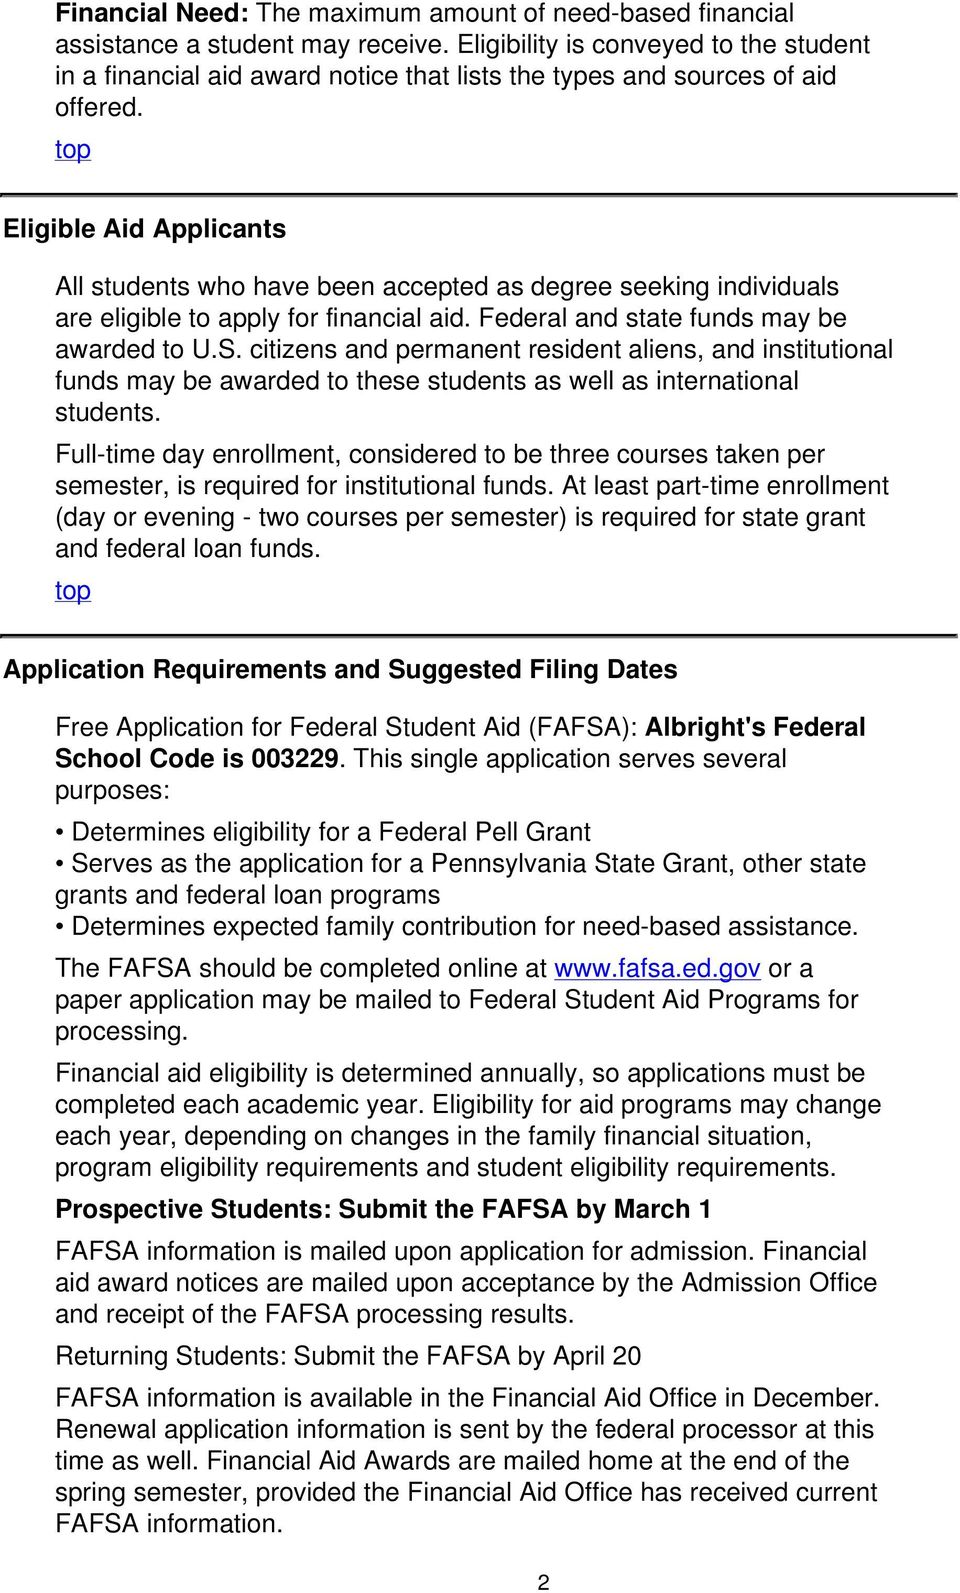 Eligible Aid Applicants All students who have been accepted as degree seeking individuals are eligible to apply for financial aid. Federal and state funds may be awarded to U.S.